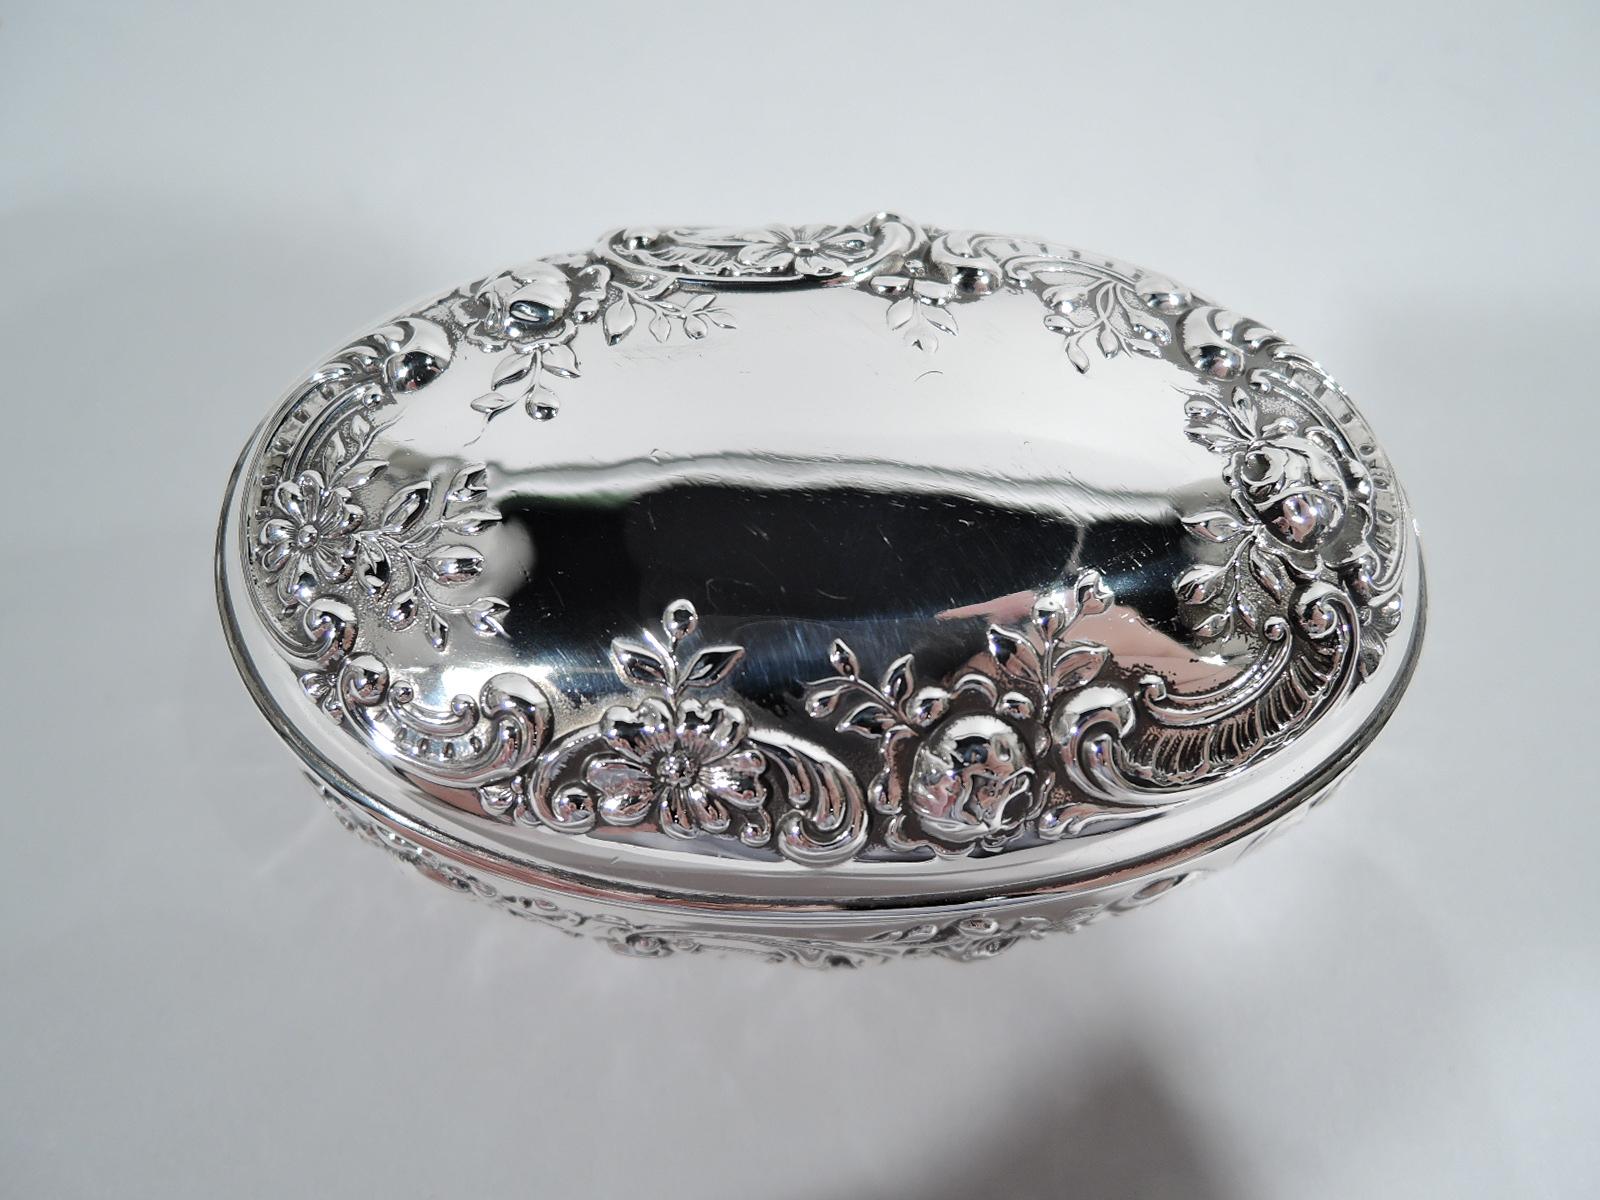 Edwardian Classical sterling silver trinket box. Made by Gorham in Providence, ca 1910. Oval with hinged and raised cover. Chased scroll and flower ornament. Cover top has vacant center. Interior gilt washed. Fully marked and numbered B160. Weight: